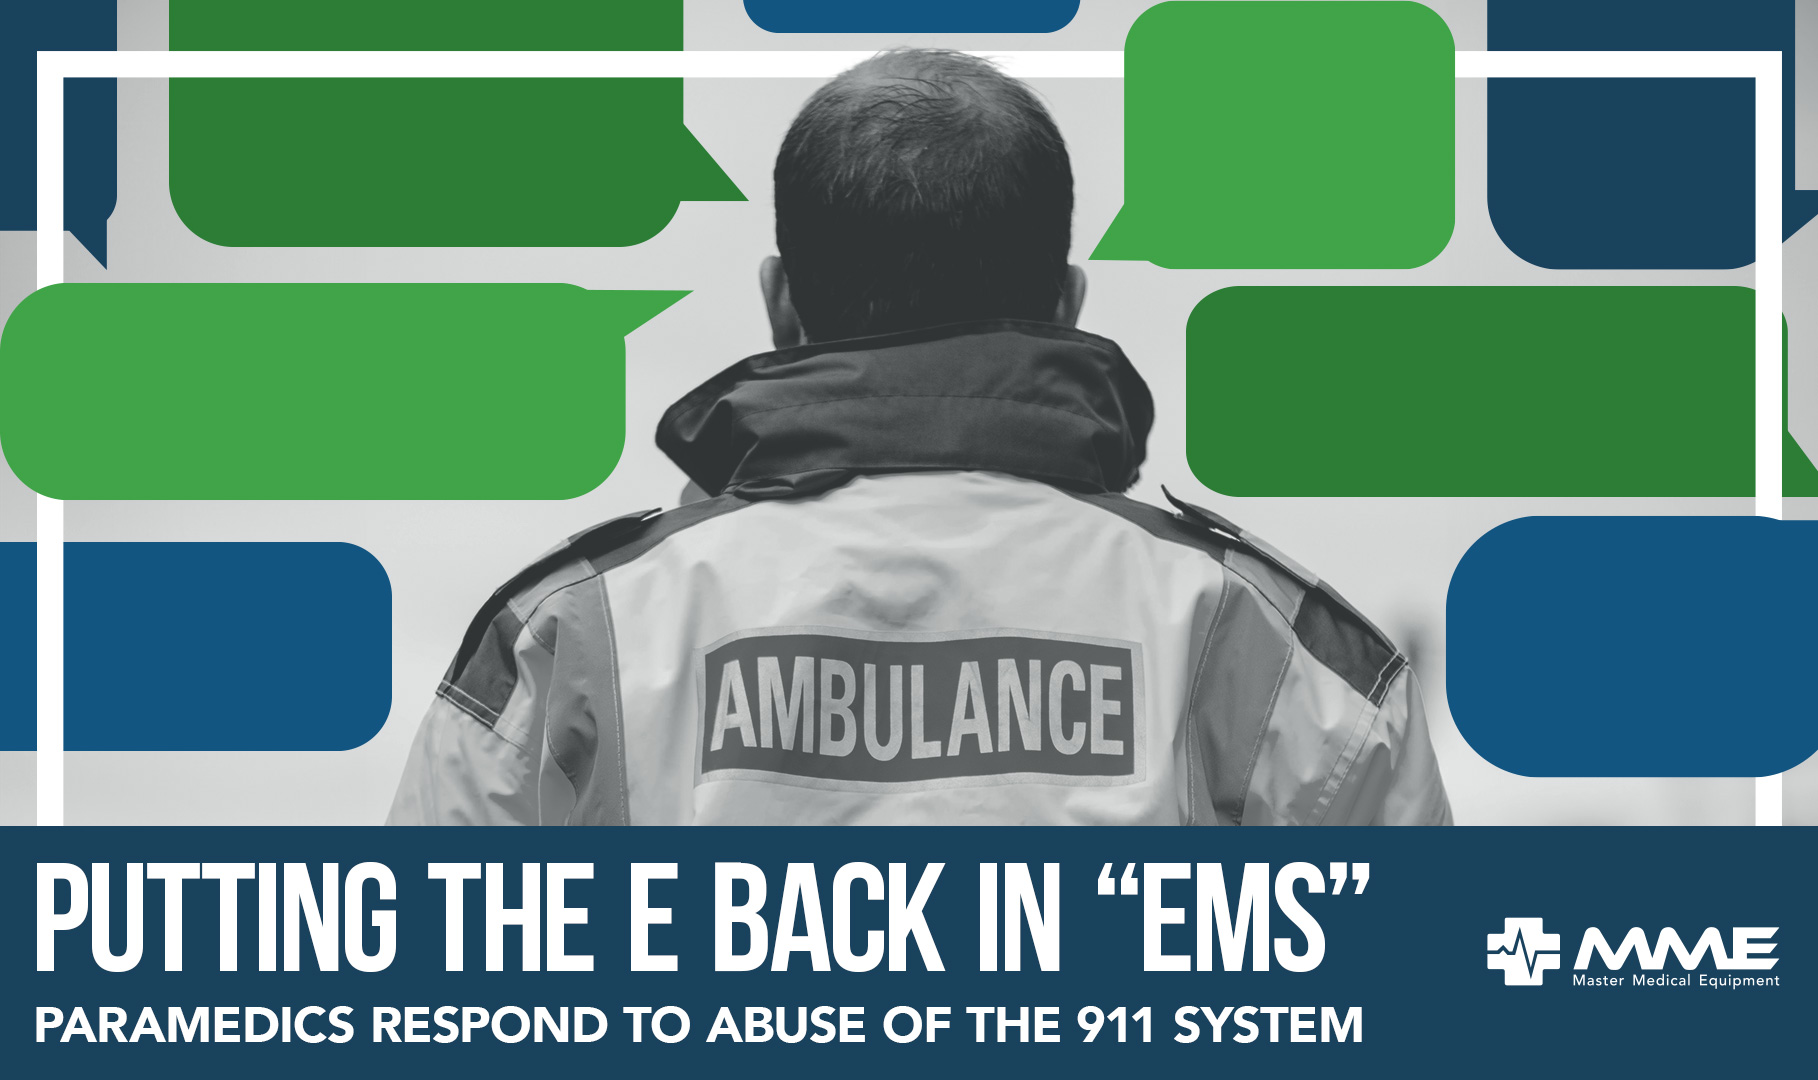 Putting the E back in EMS. Non emergency transport abuse of 911